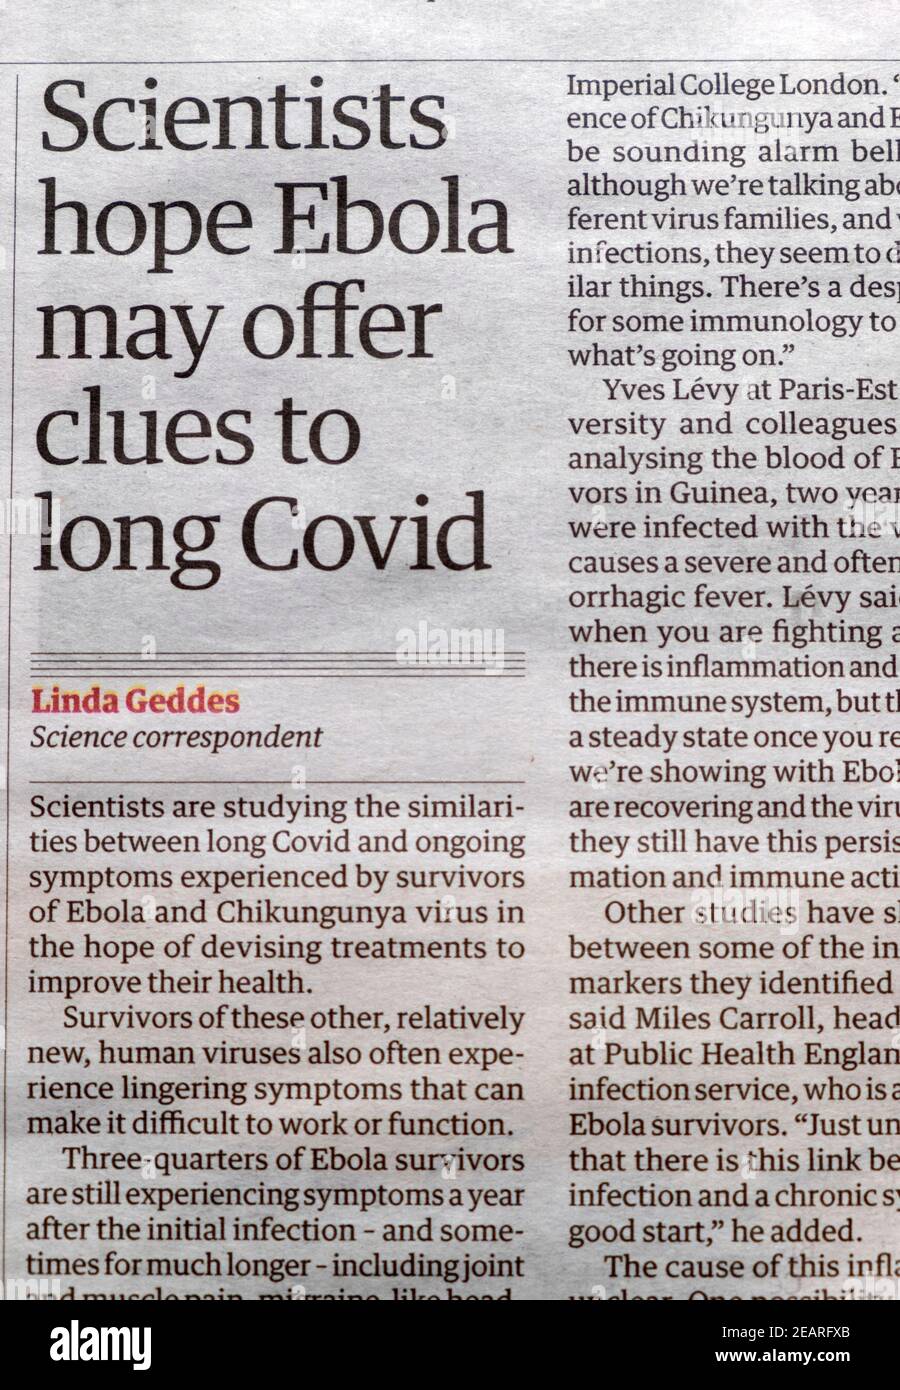 'Scientists hope Ebola may offer clues to long Covid' Guardian newspaper headline article page 29 January 2021 London UK Stock Photo